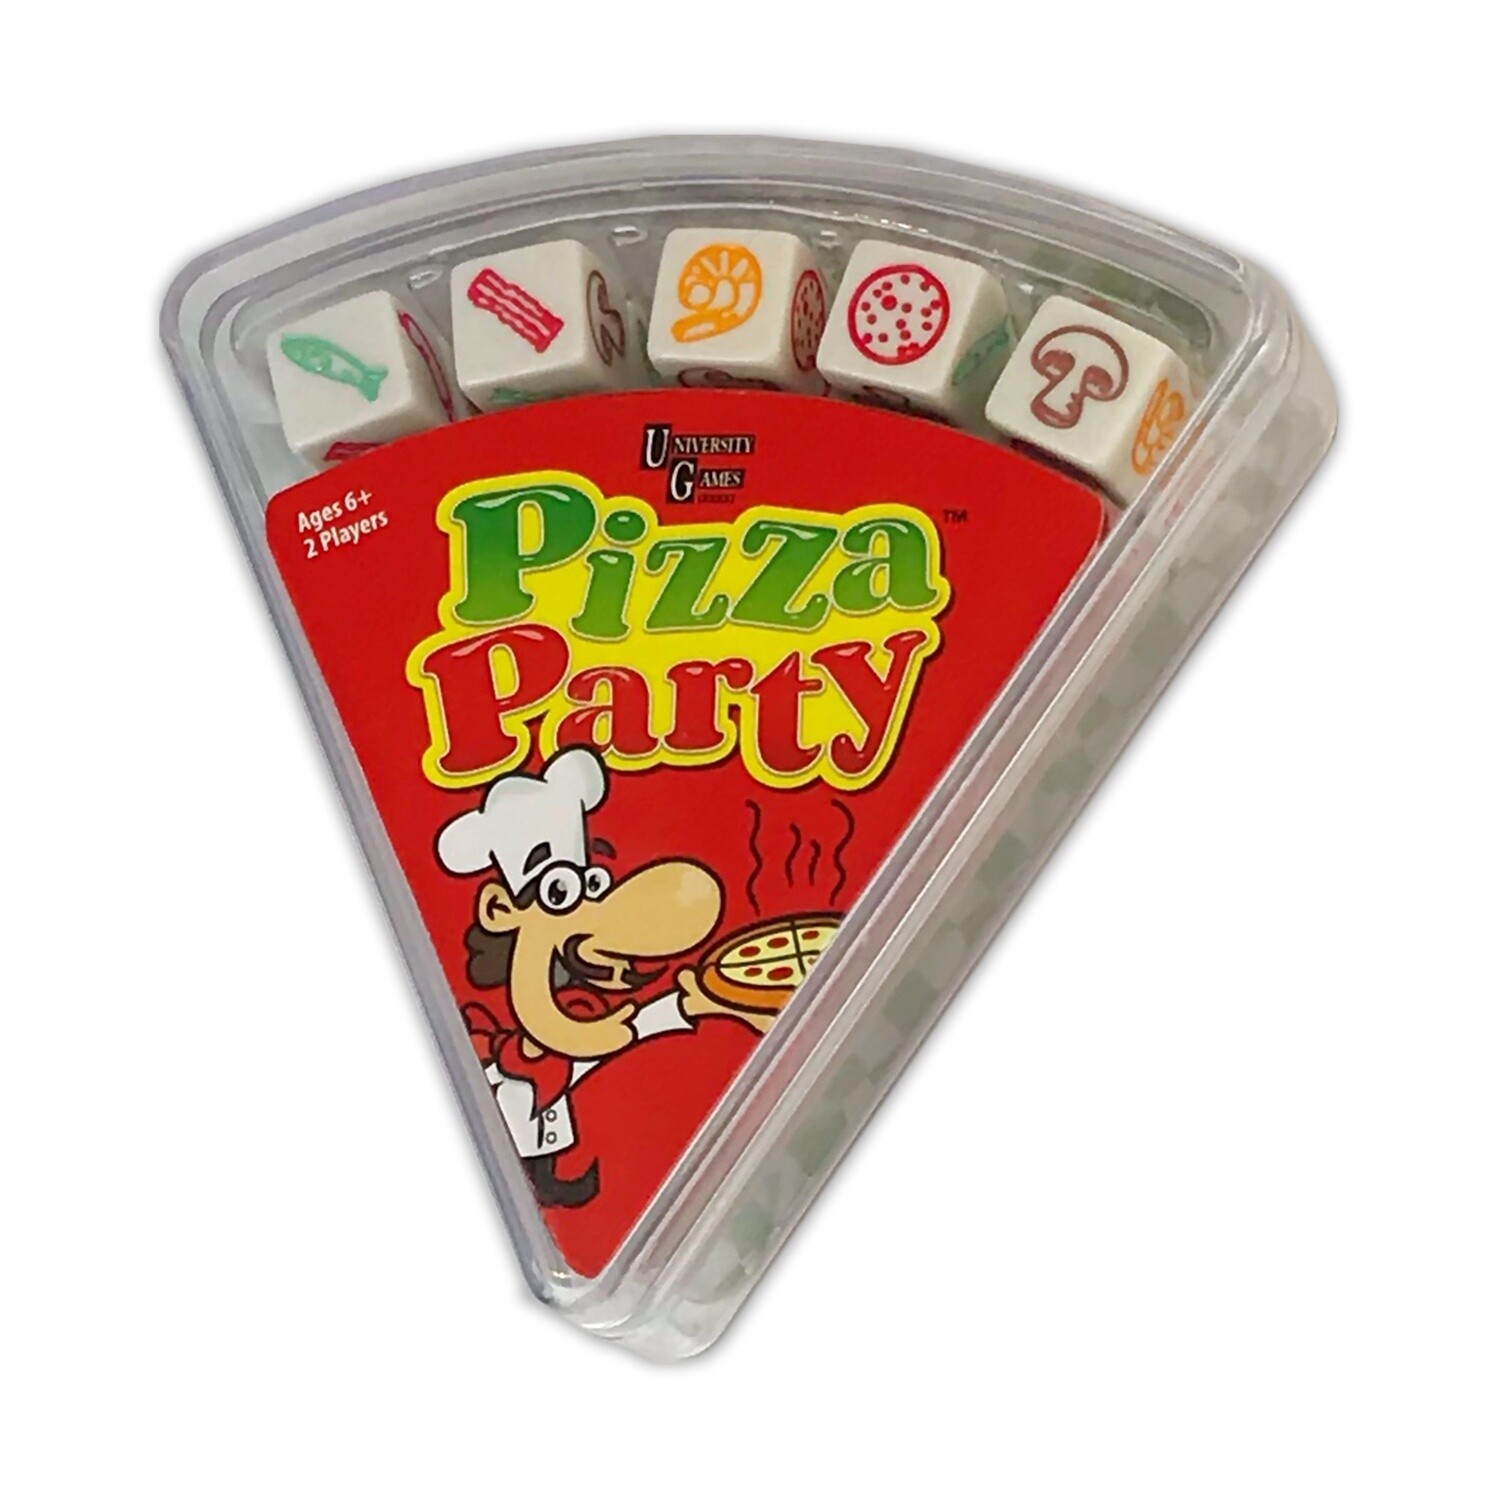 University Games Pizza Party